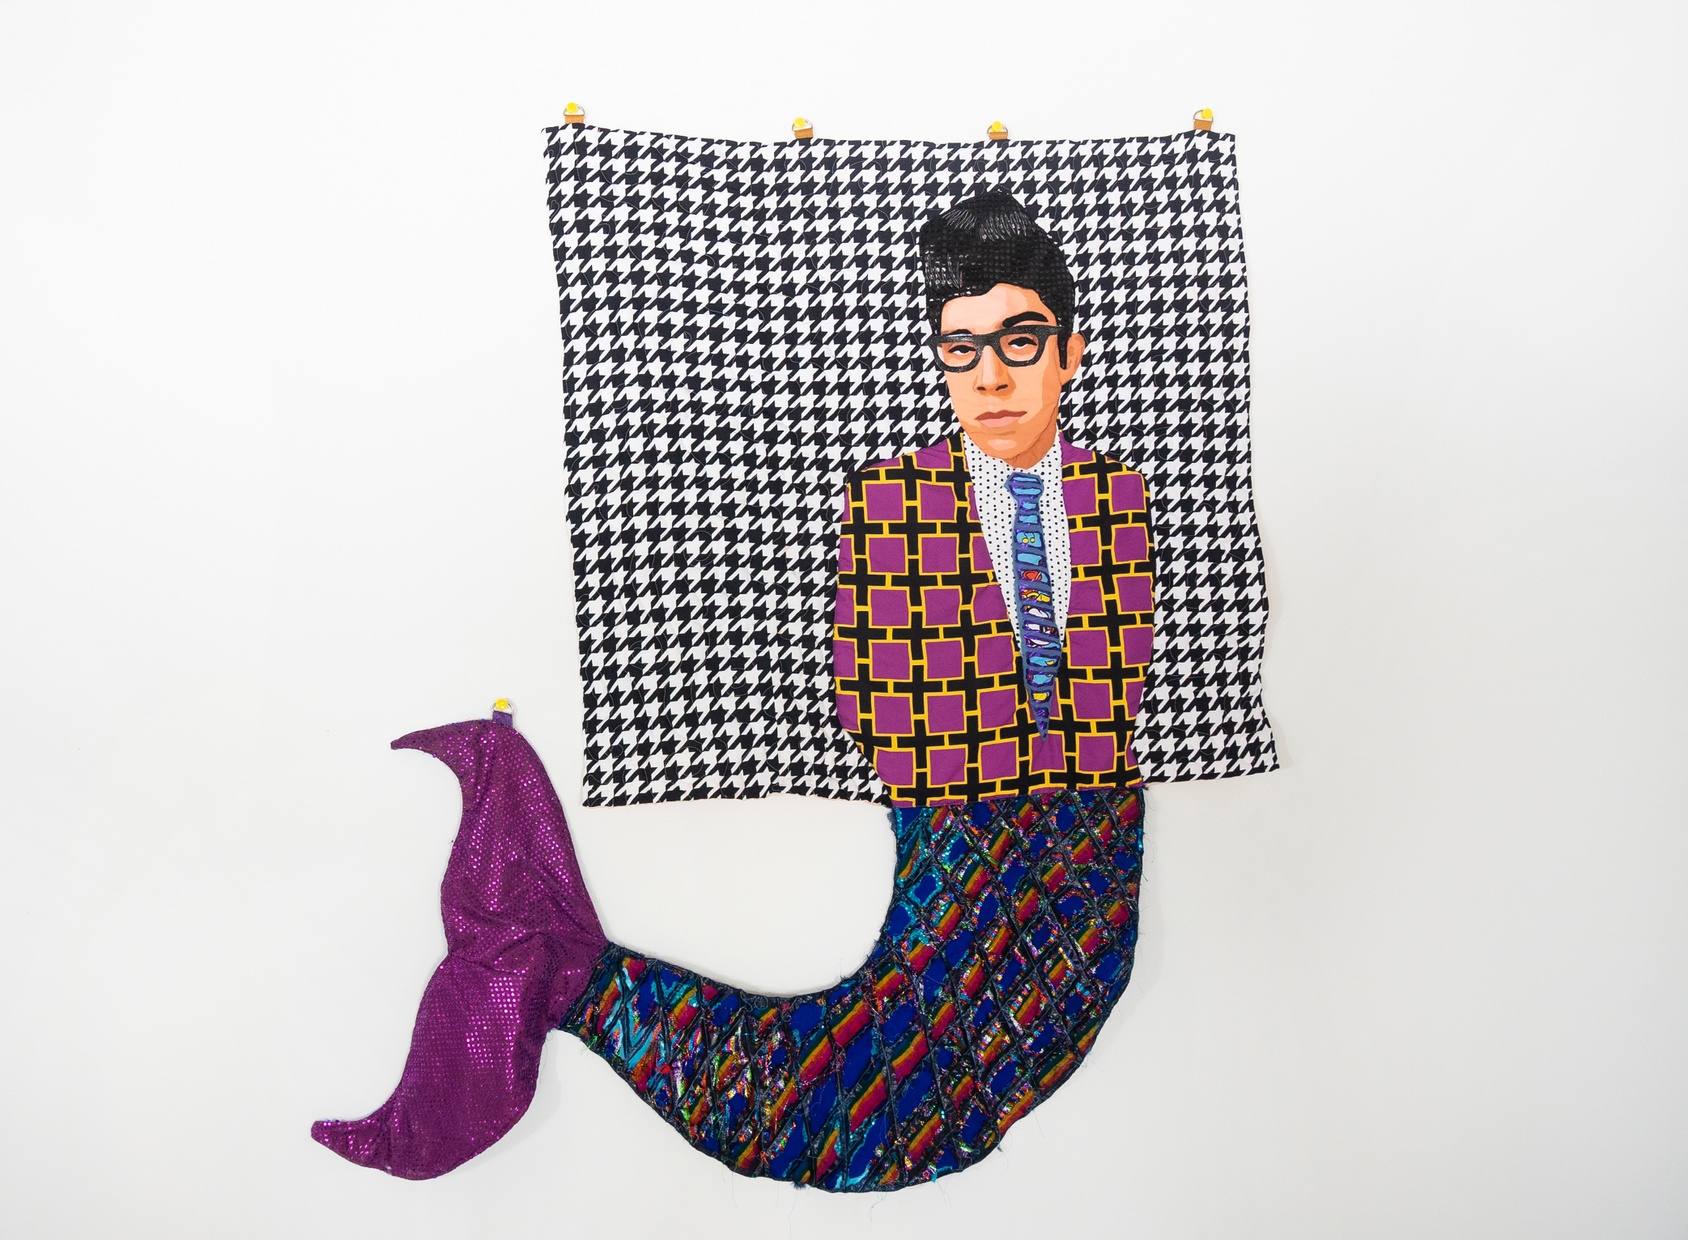 A collage portrait of a Latino man wearing a tie and plus-signed-pattern jacket on a patterned background, with a sequined blue and purple mermaid tail extending below his torso. 